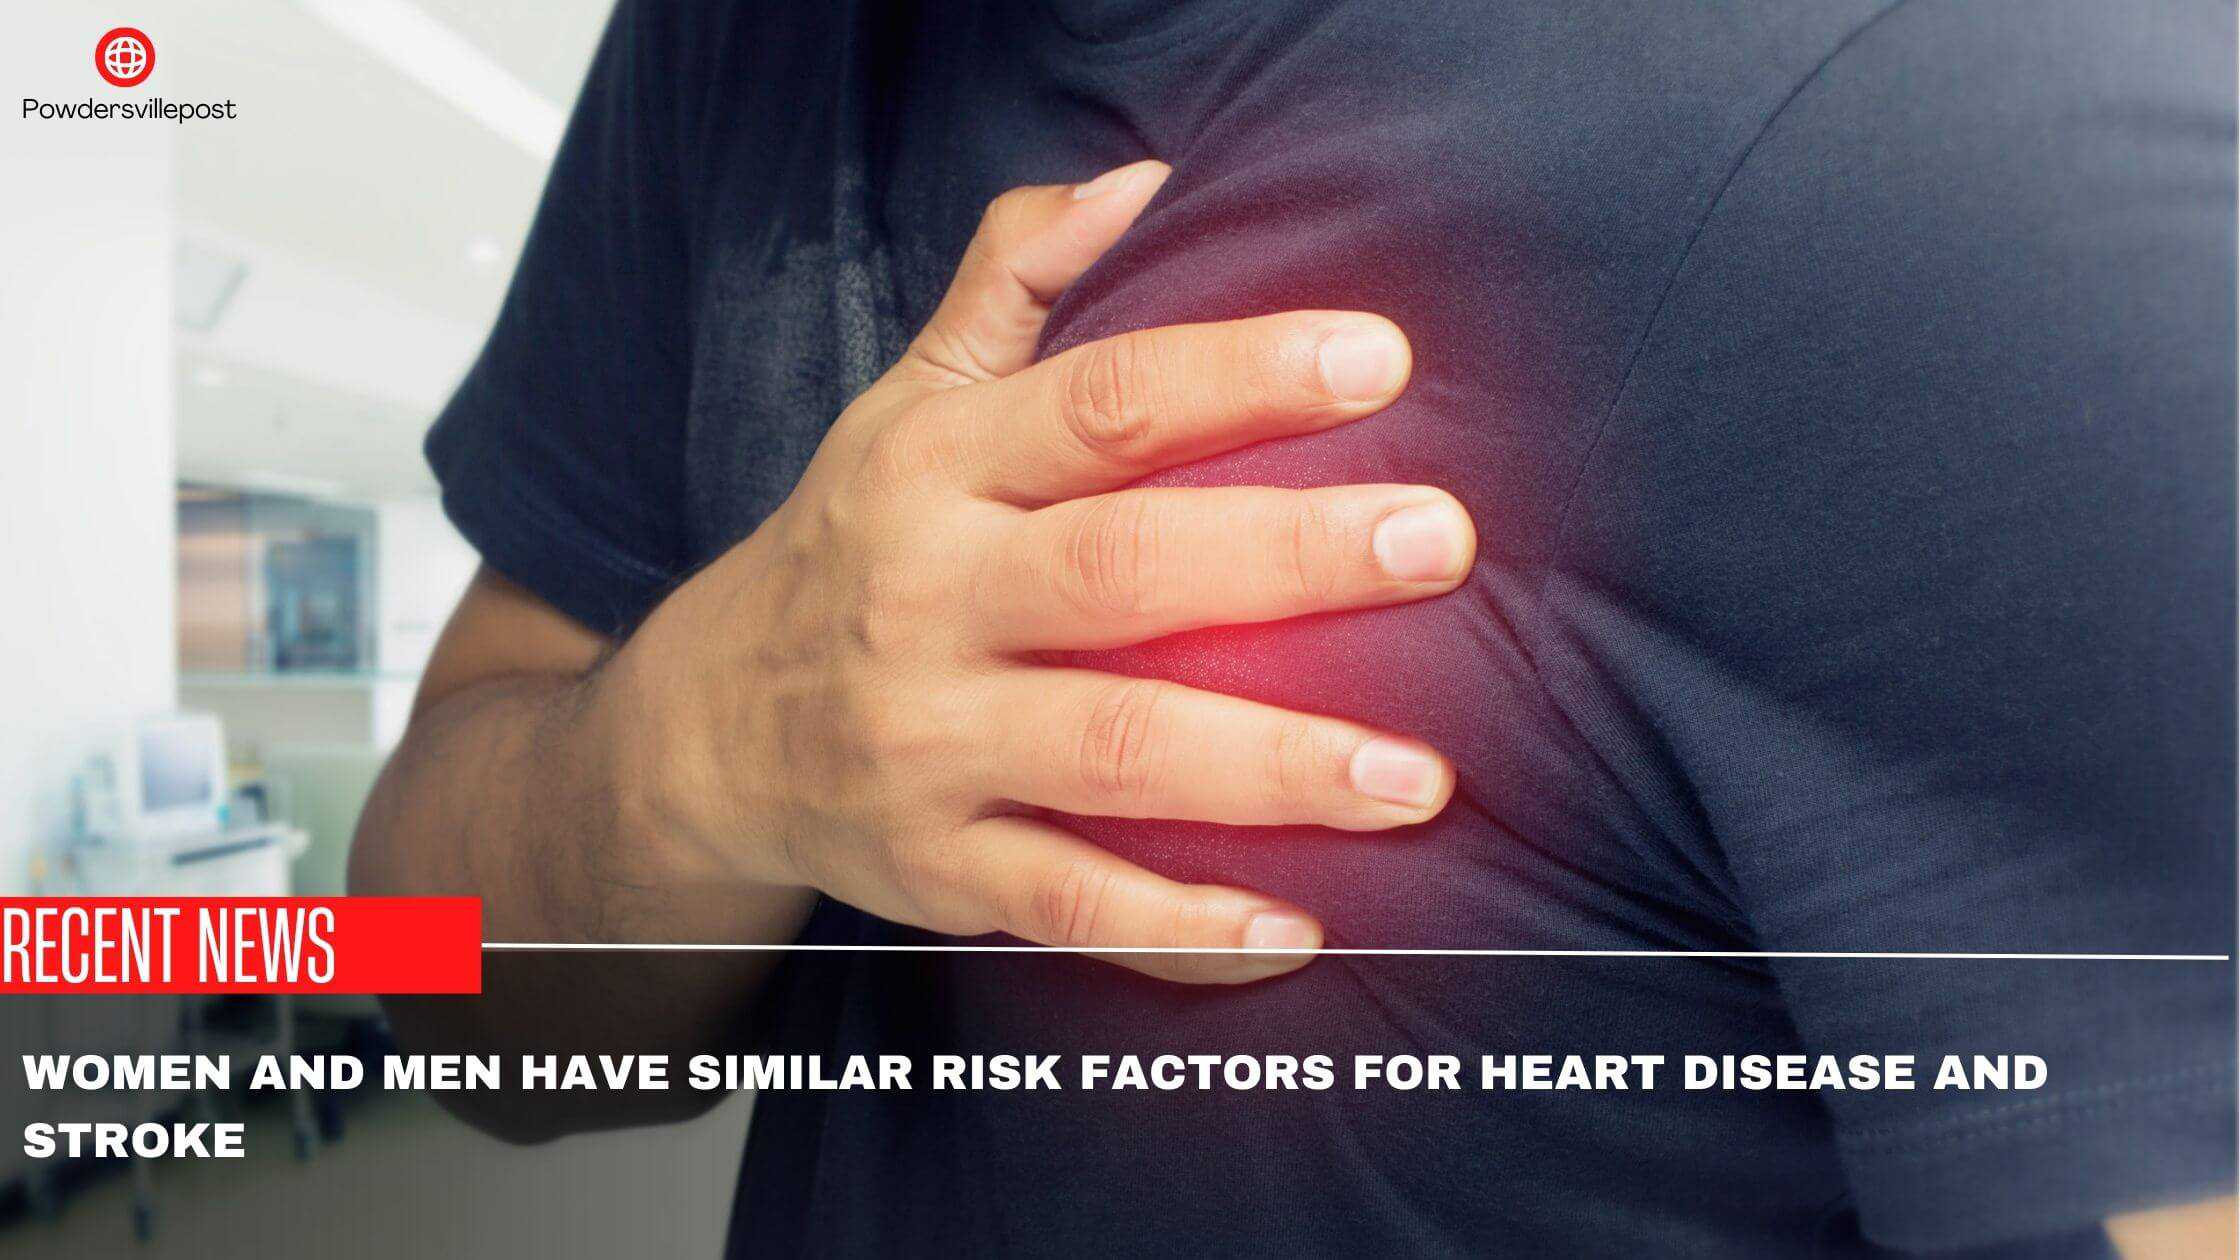 Women And Men Have Similar Risk Factors For Heart Disease And Stroke